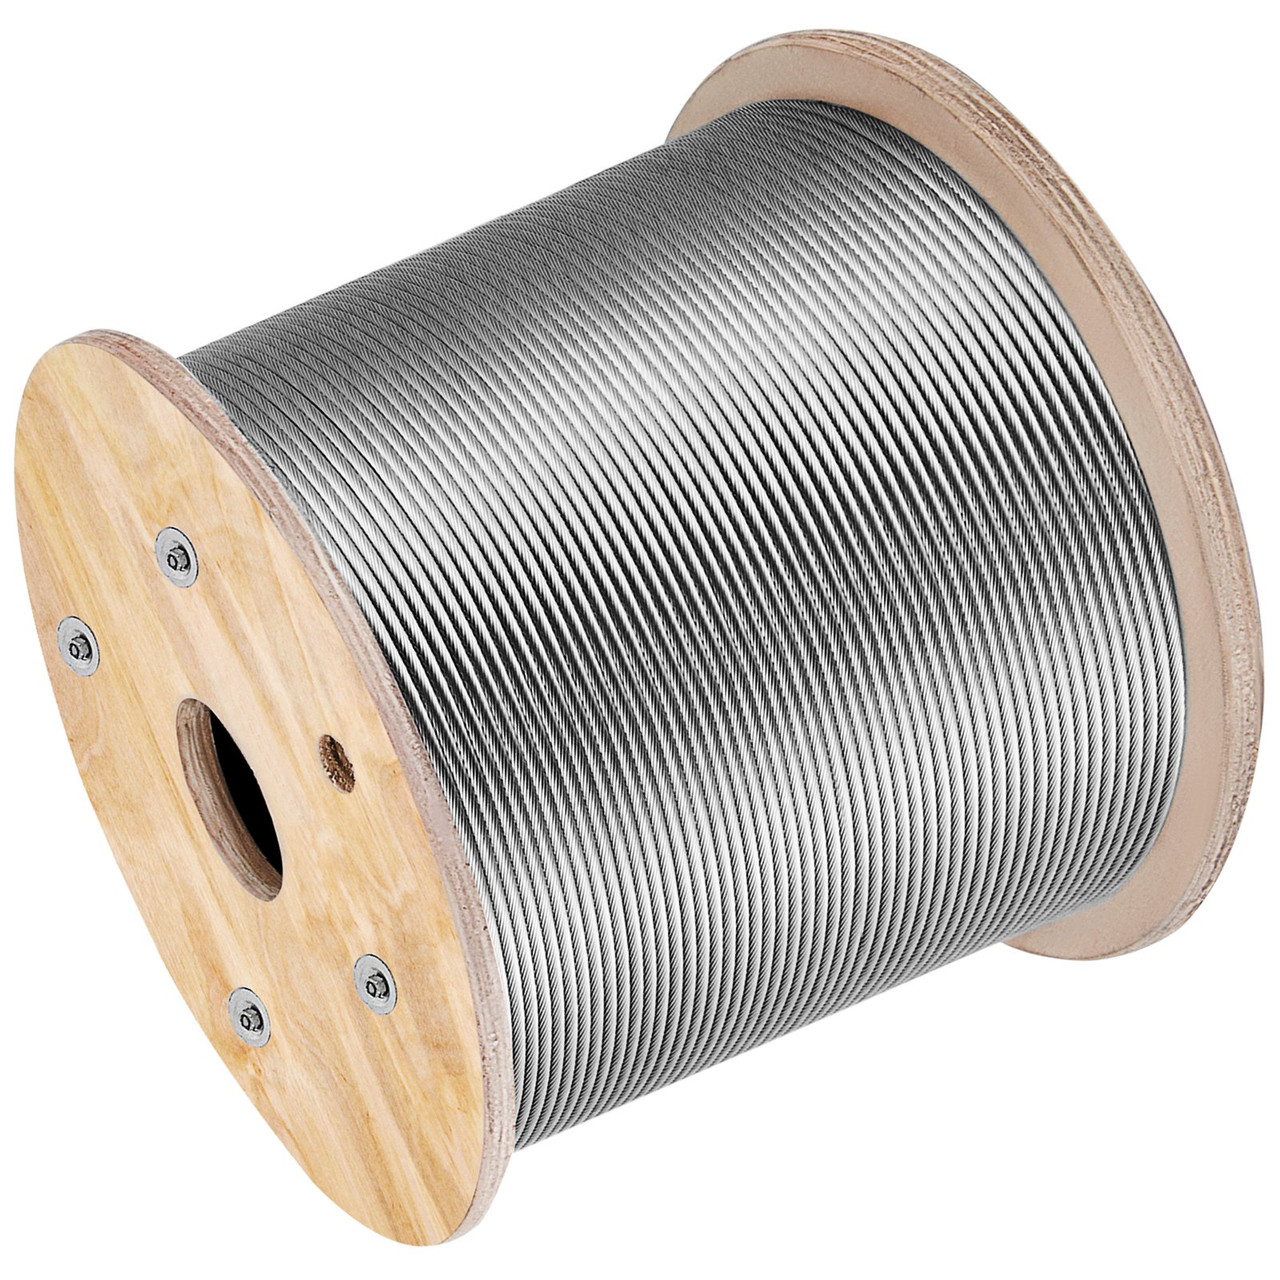 VEVOR T316 Stainless Steel Cable, 1/8'' x 1000 ft, Braided Aircraft Wire Rope with 1x19 Strands Construction, 2100 lbs Breaking Strength, for Deck Railing Stair Handrail Balusters Porch Fence